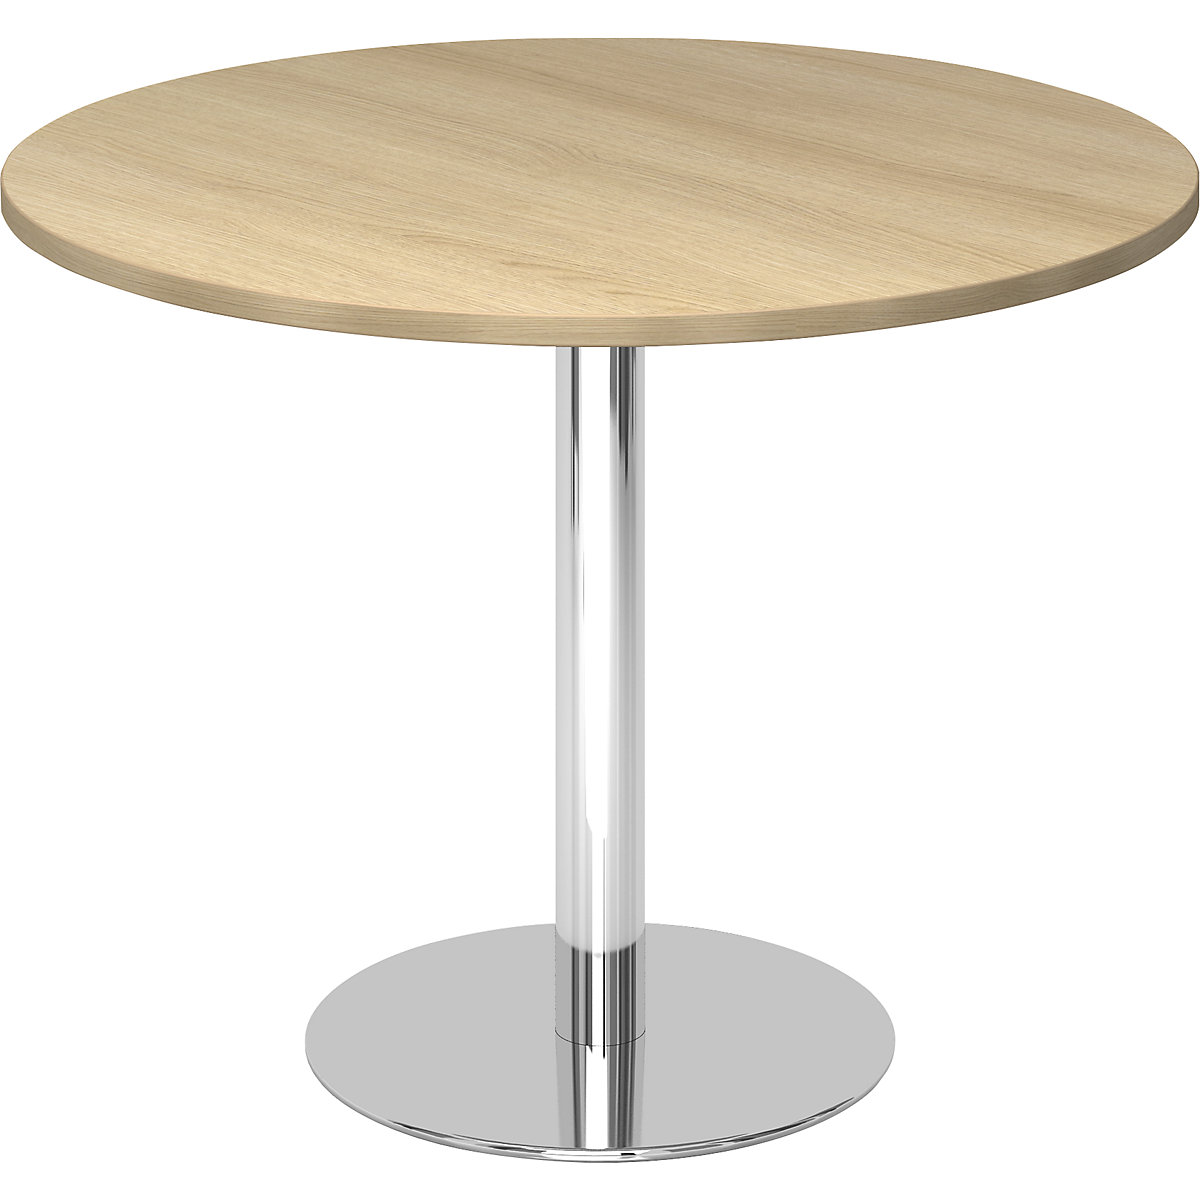 Conference table, Ø 1000 mm, 755 mm high, chrome plated frame, tabletop in oak finish-5